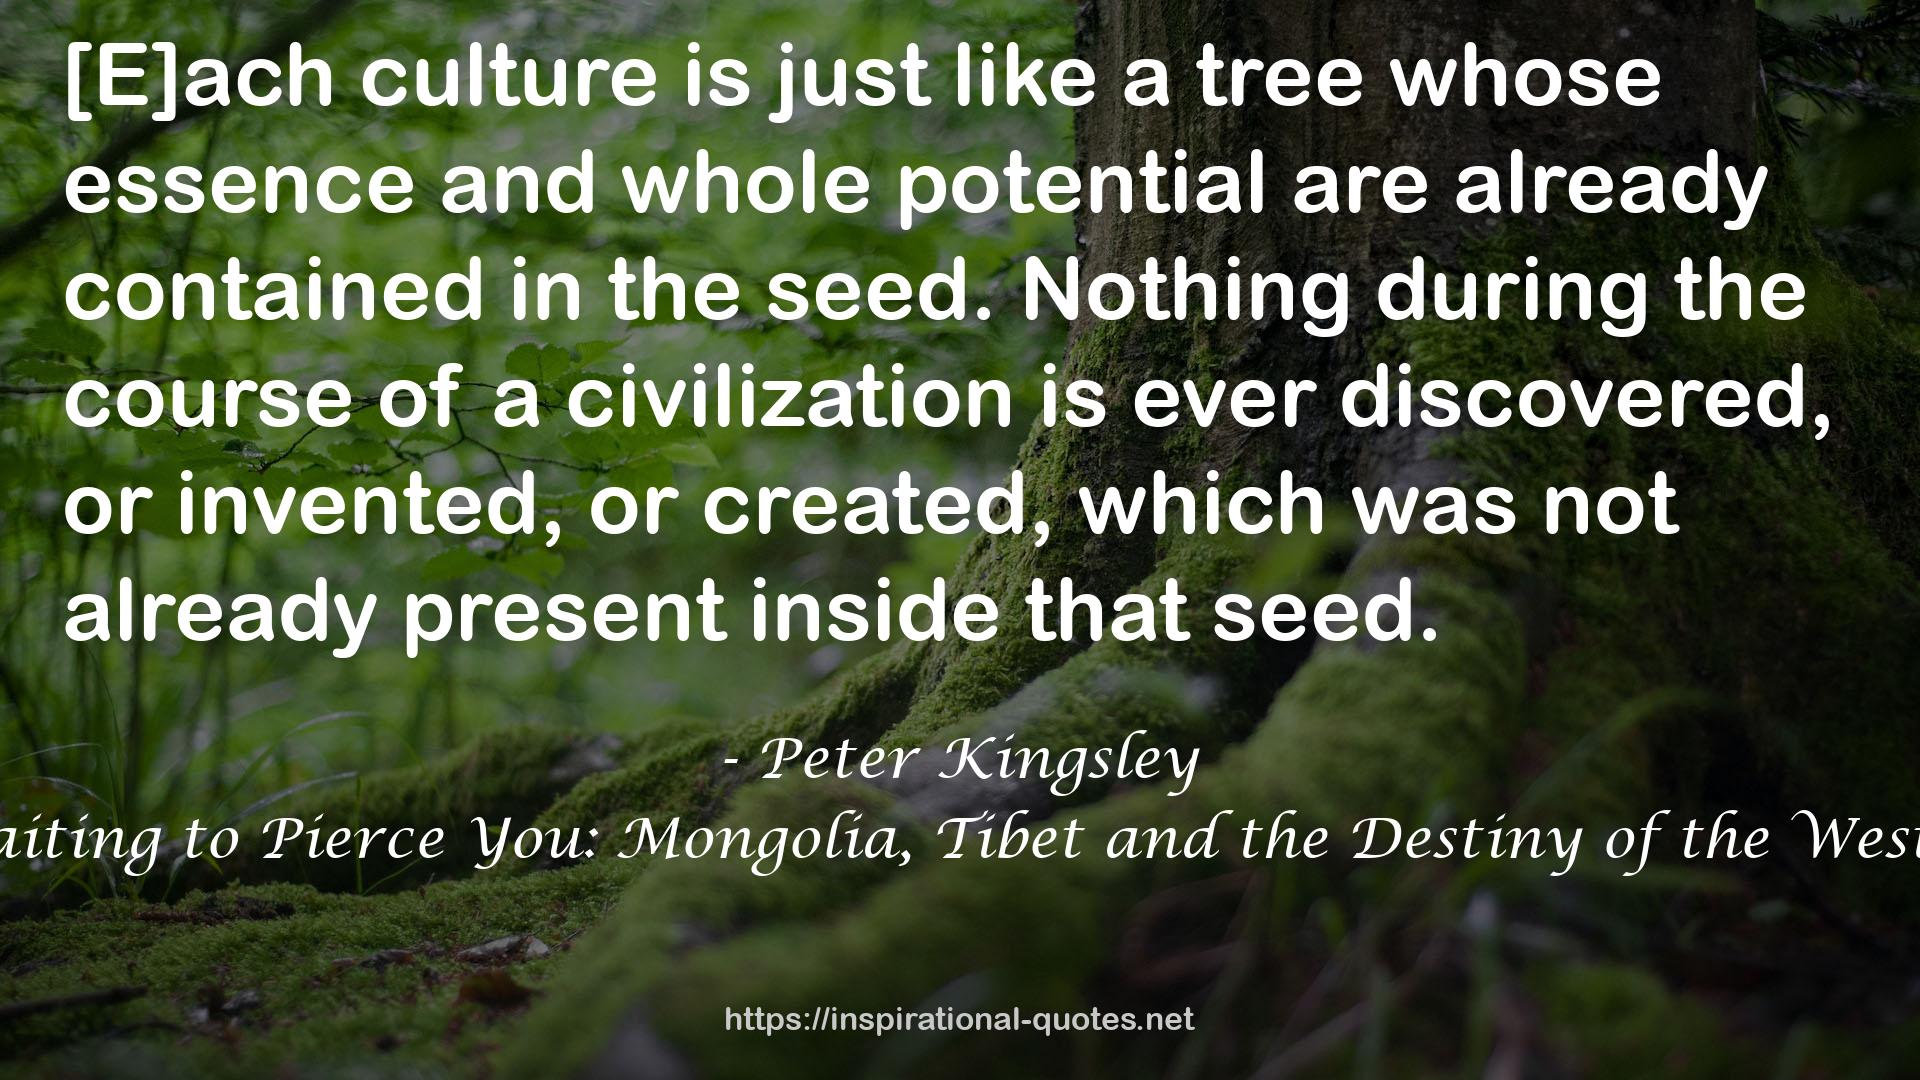 A Story Waiting to Pierce You: Mongolia, Tibet and the Destiny of the Western World QUOTES